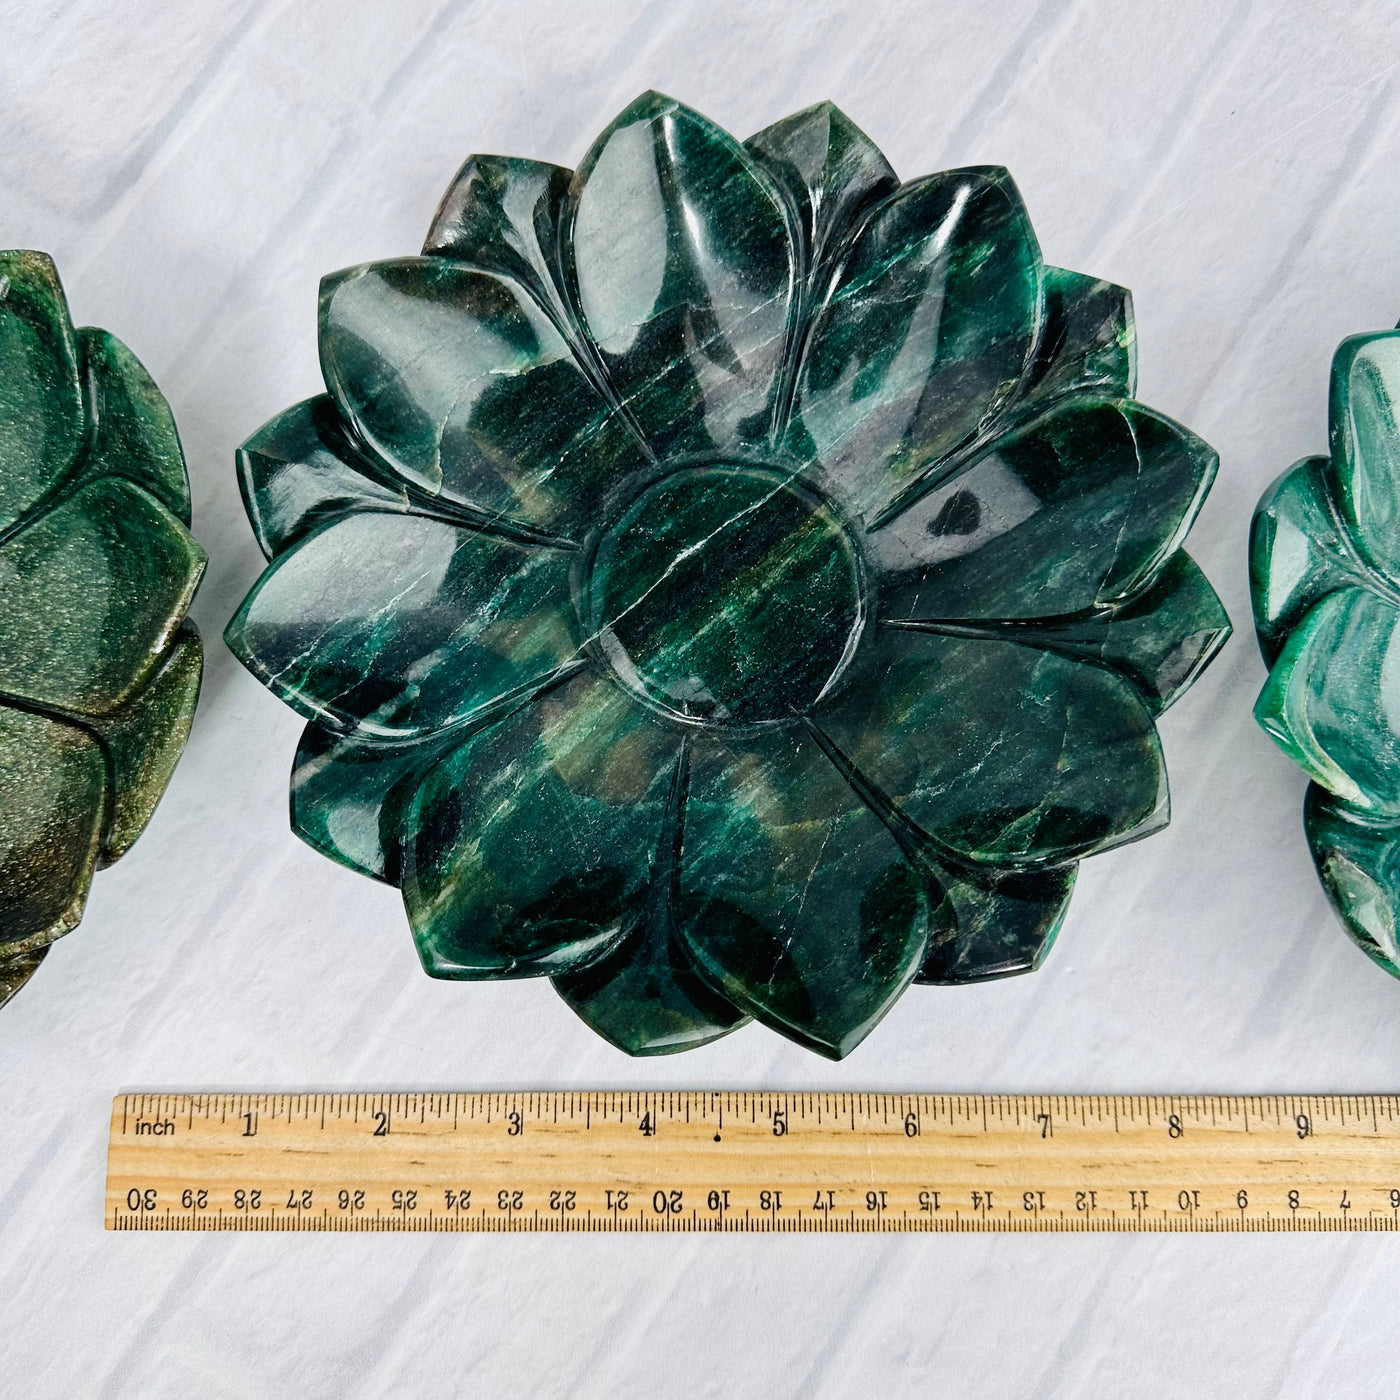 Green Quartz Lotus Bowl next to a ruler for size reference.